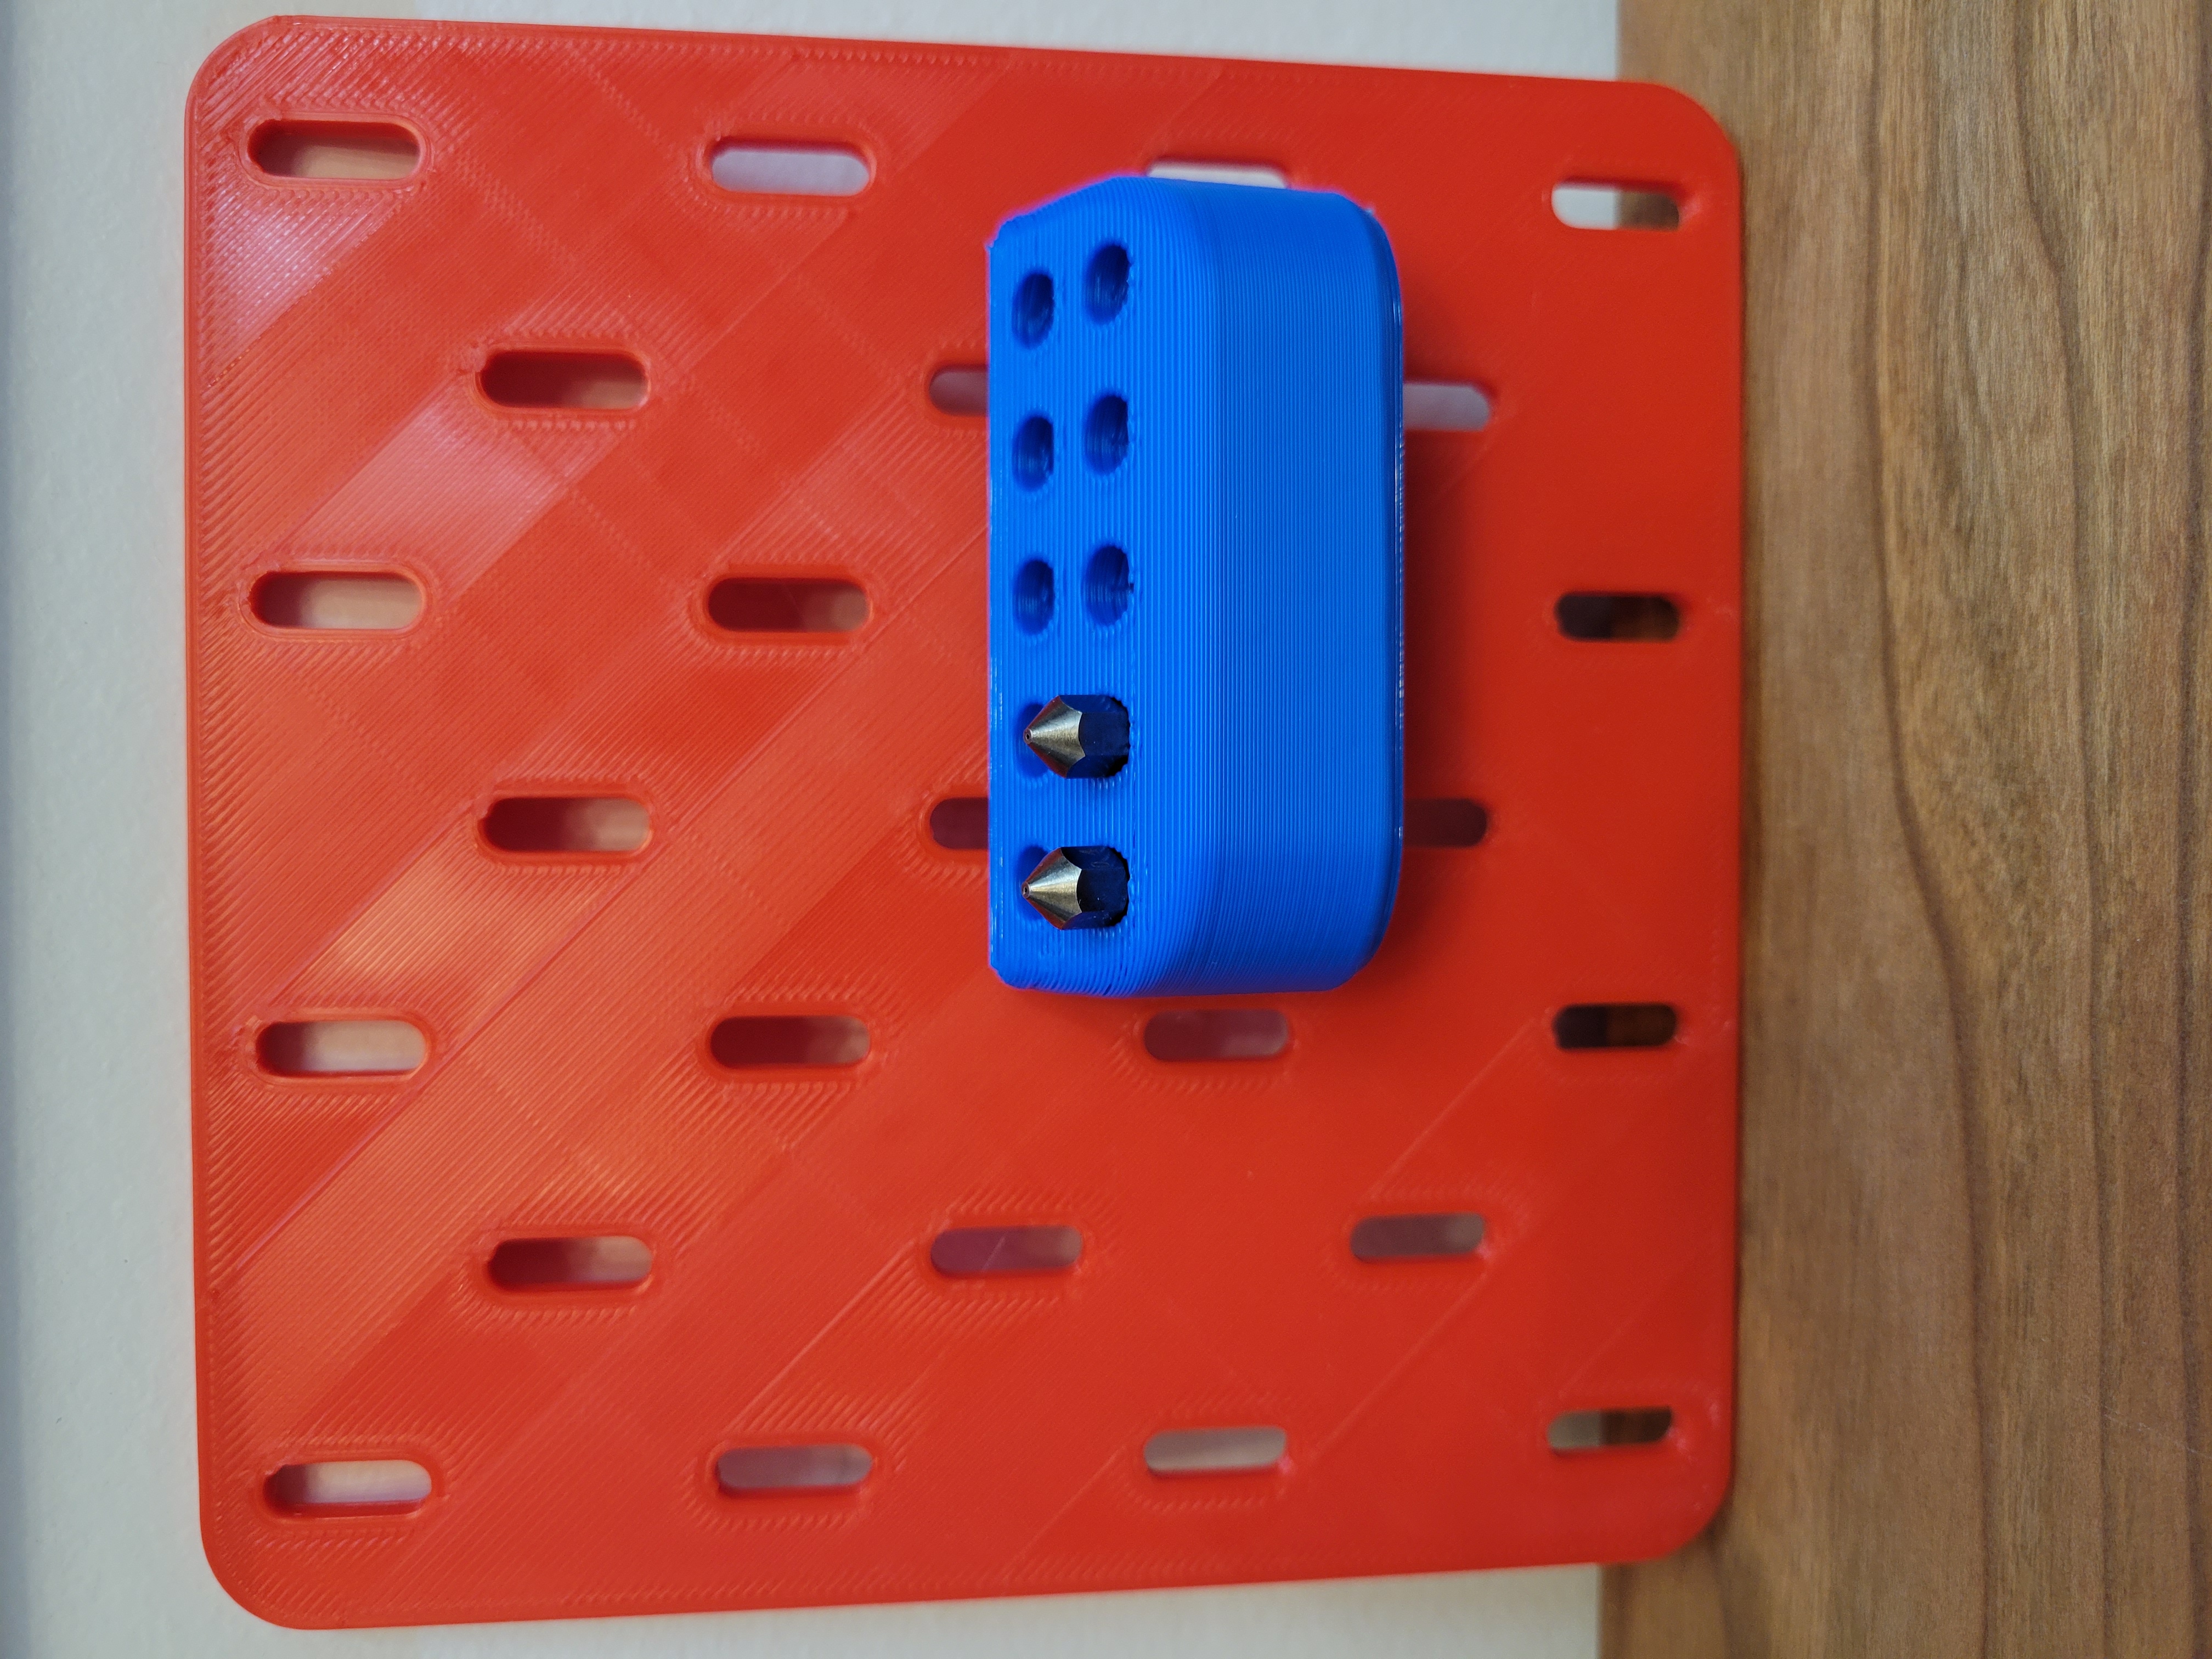 Nozzle holder for Pegboard